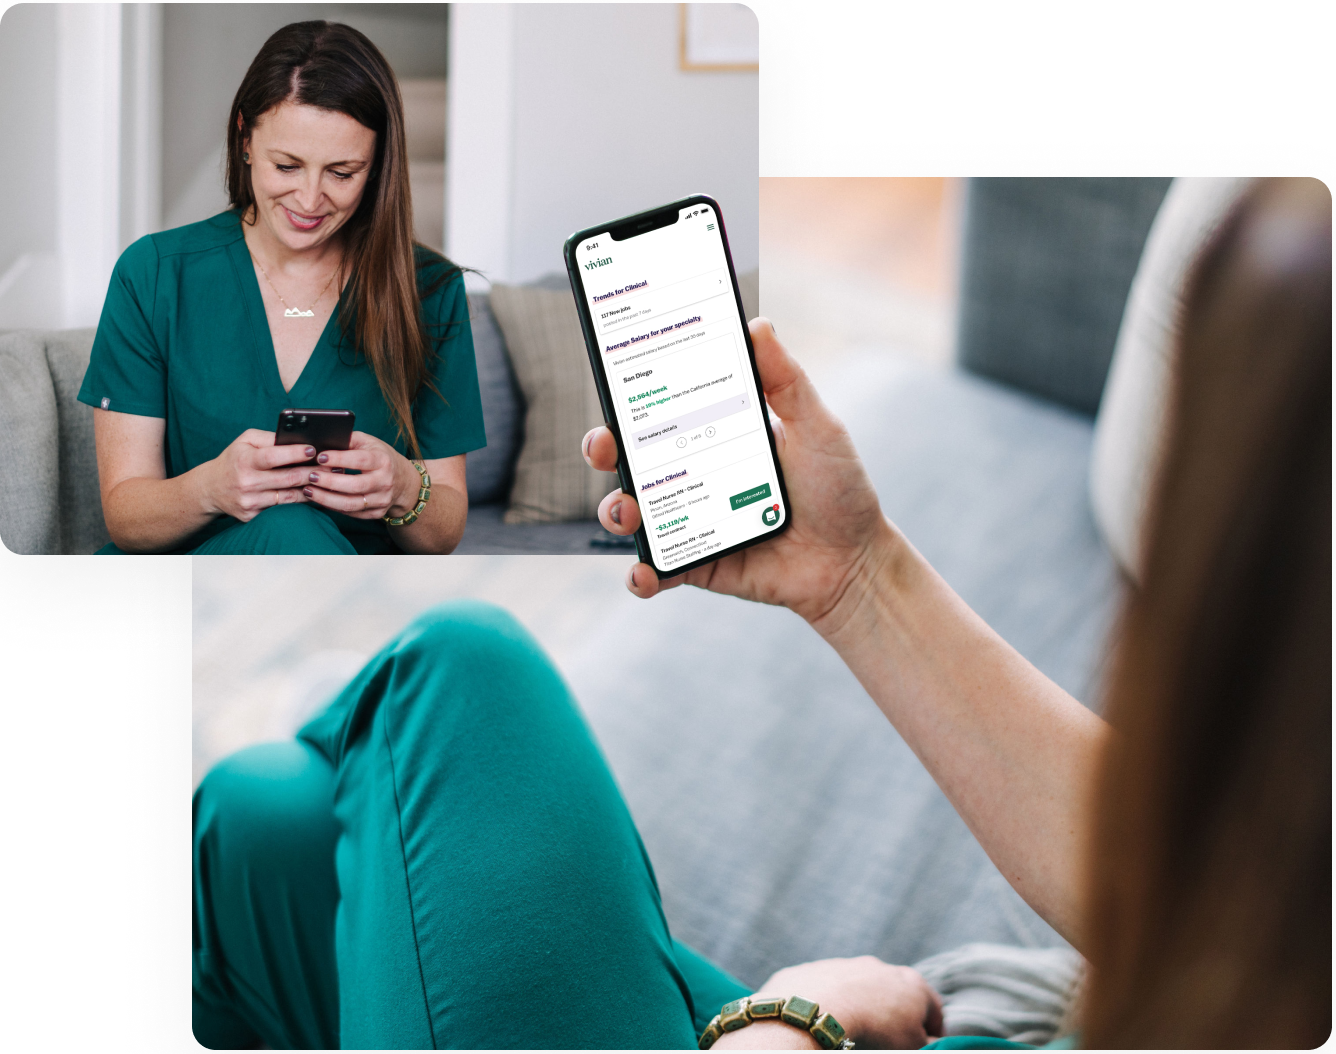 A healthcare professional uses the Vivian app to view location information